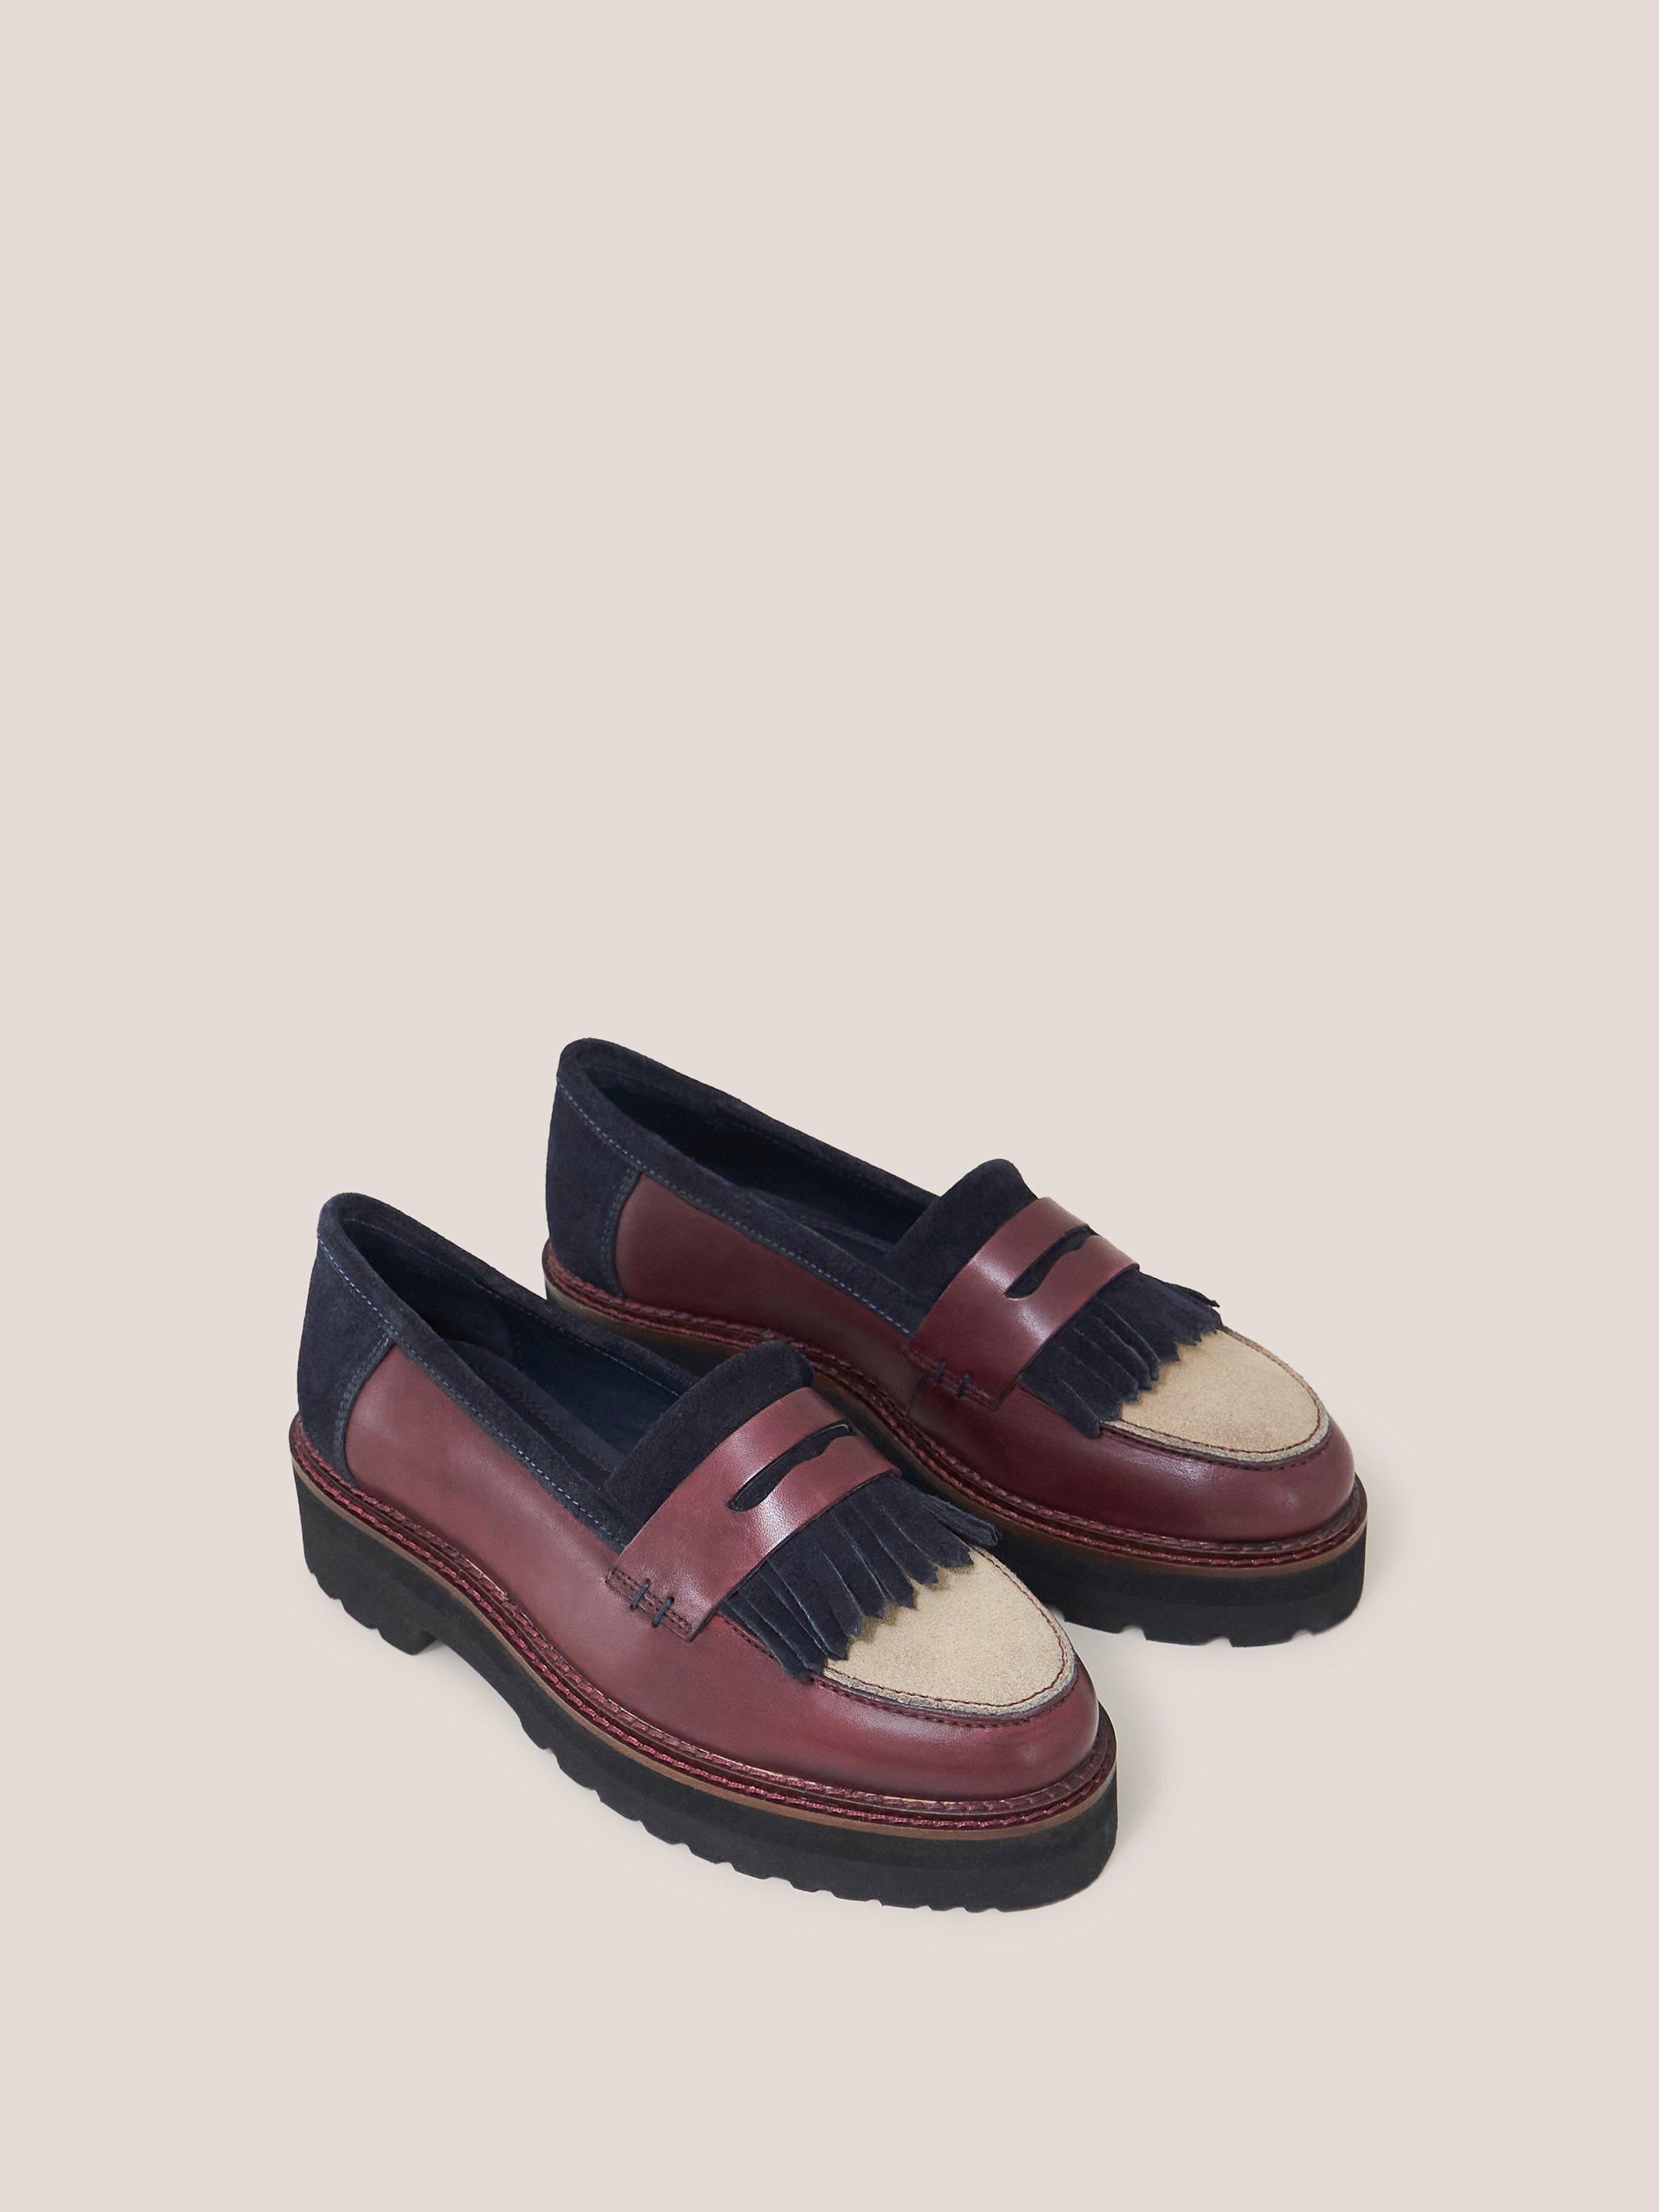 Elva Chunky Leather Mix Loafer in NAVY MULTI - FLAT FRONT